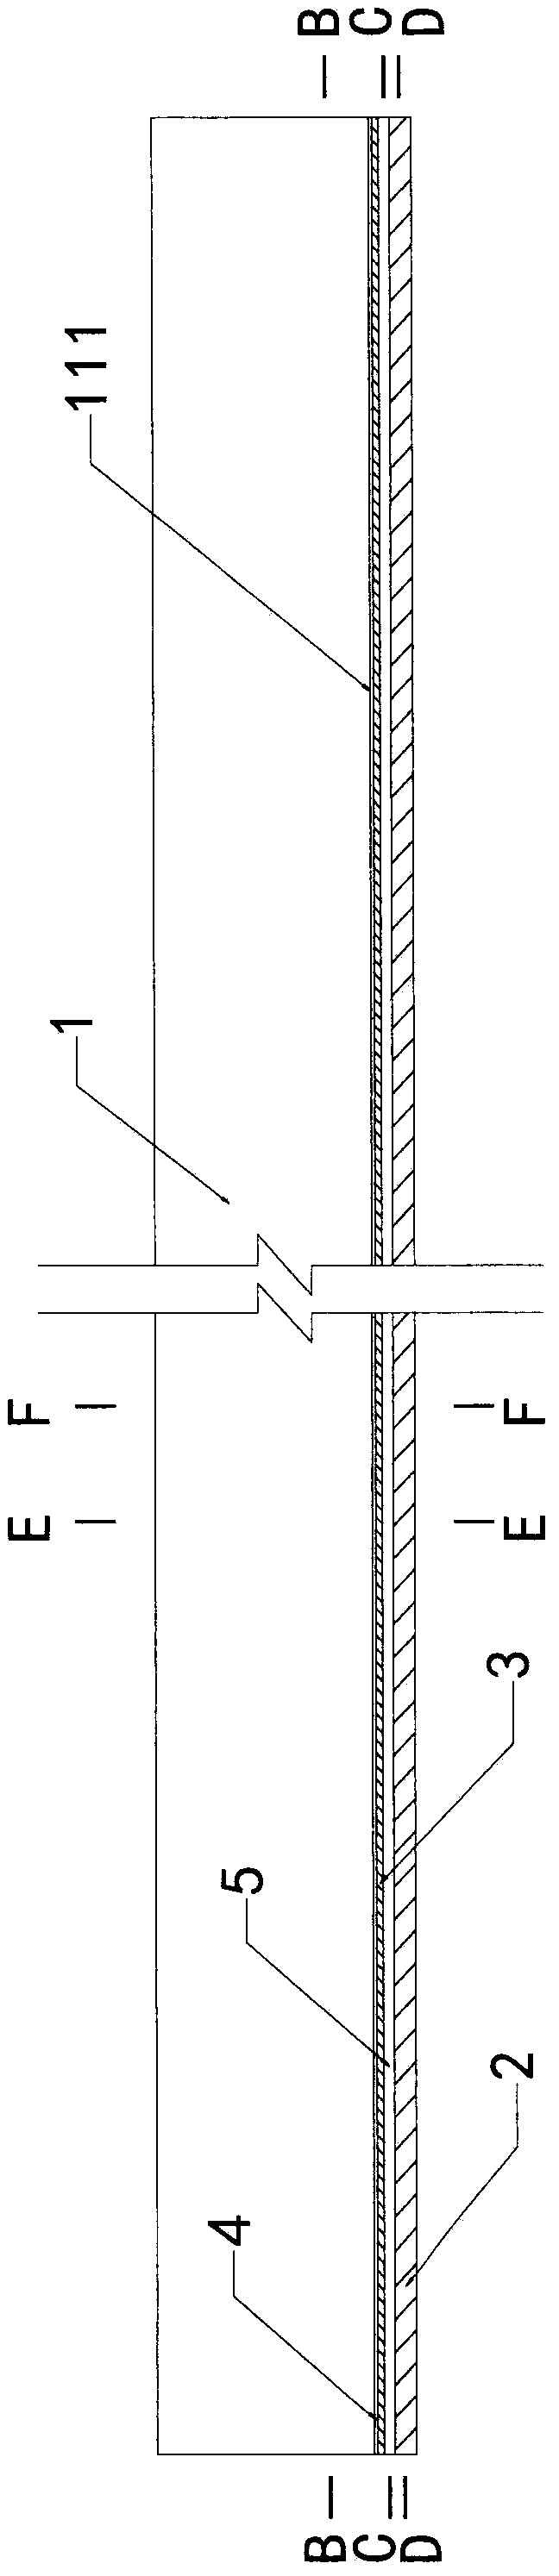 A method for compositely strengthening wooden beams